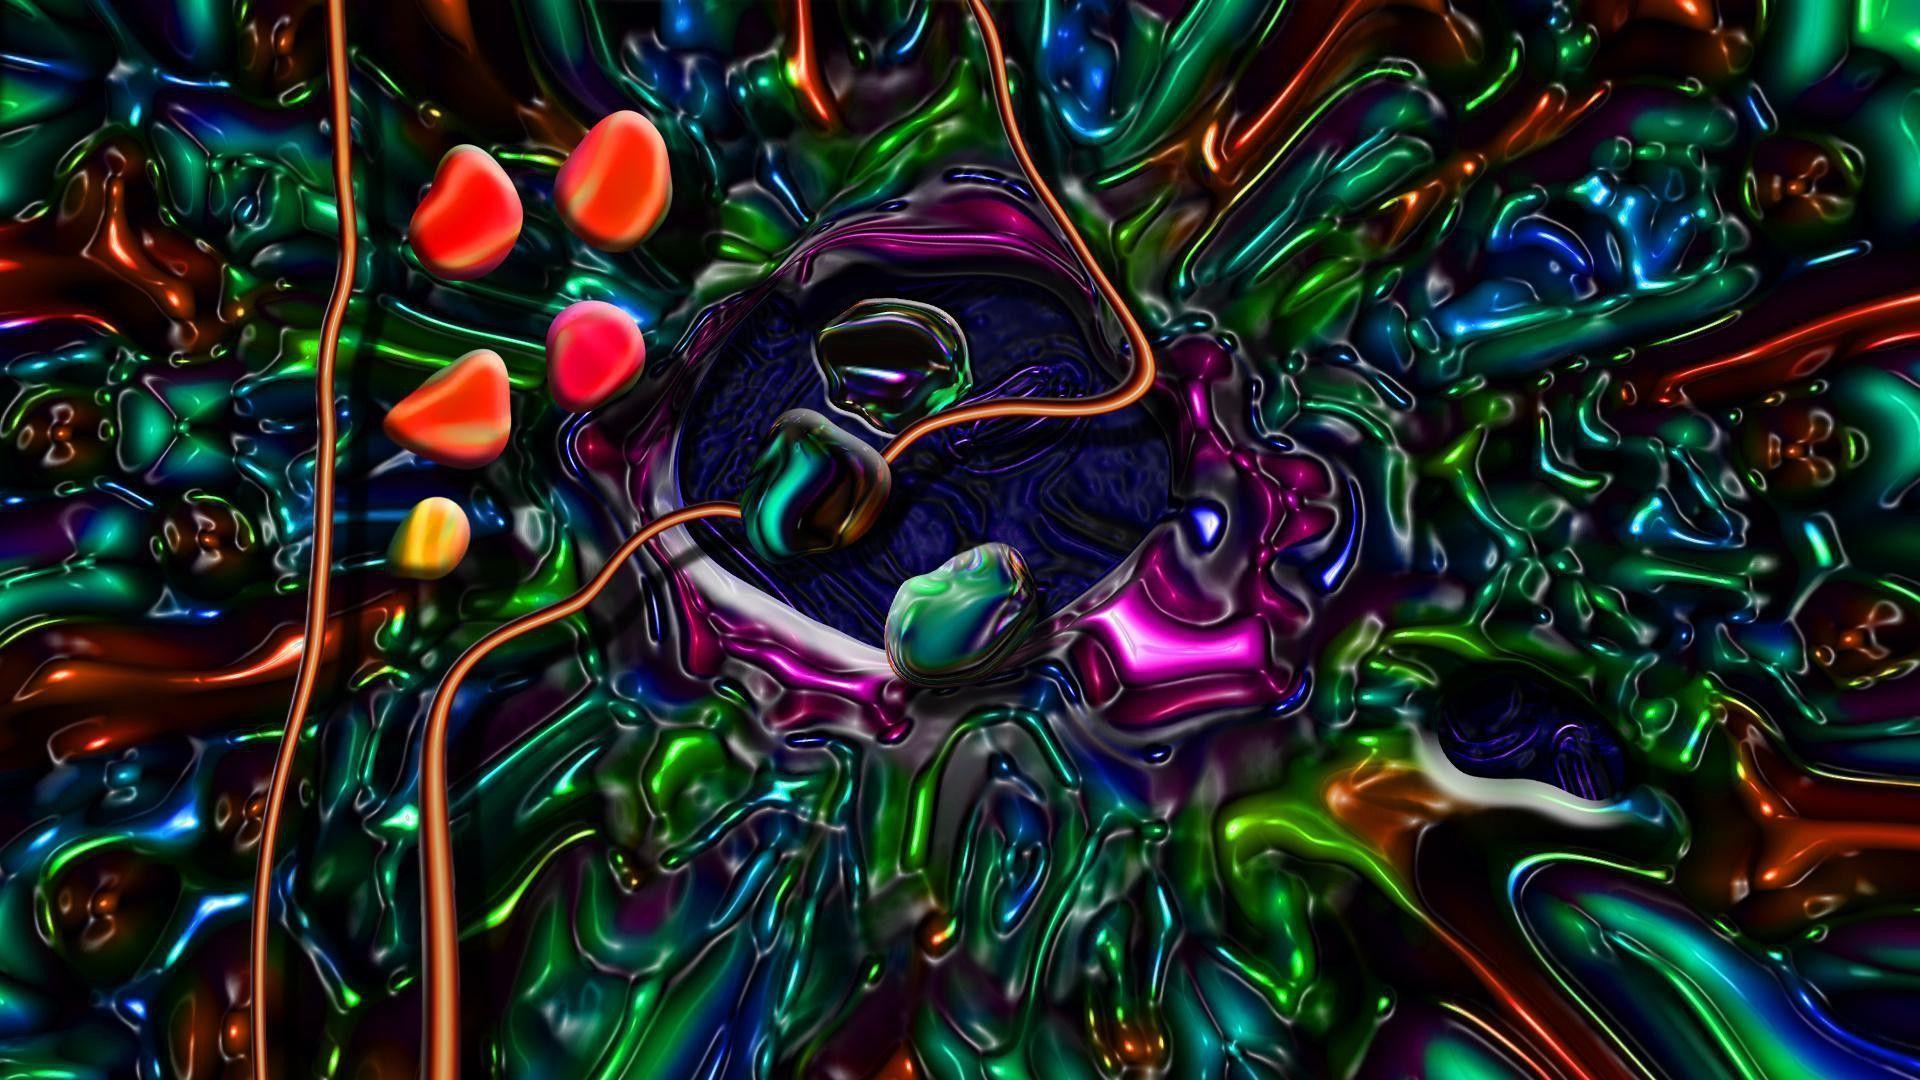 A colorful abstract artwork with many different colors - 3D